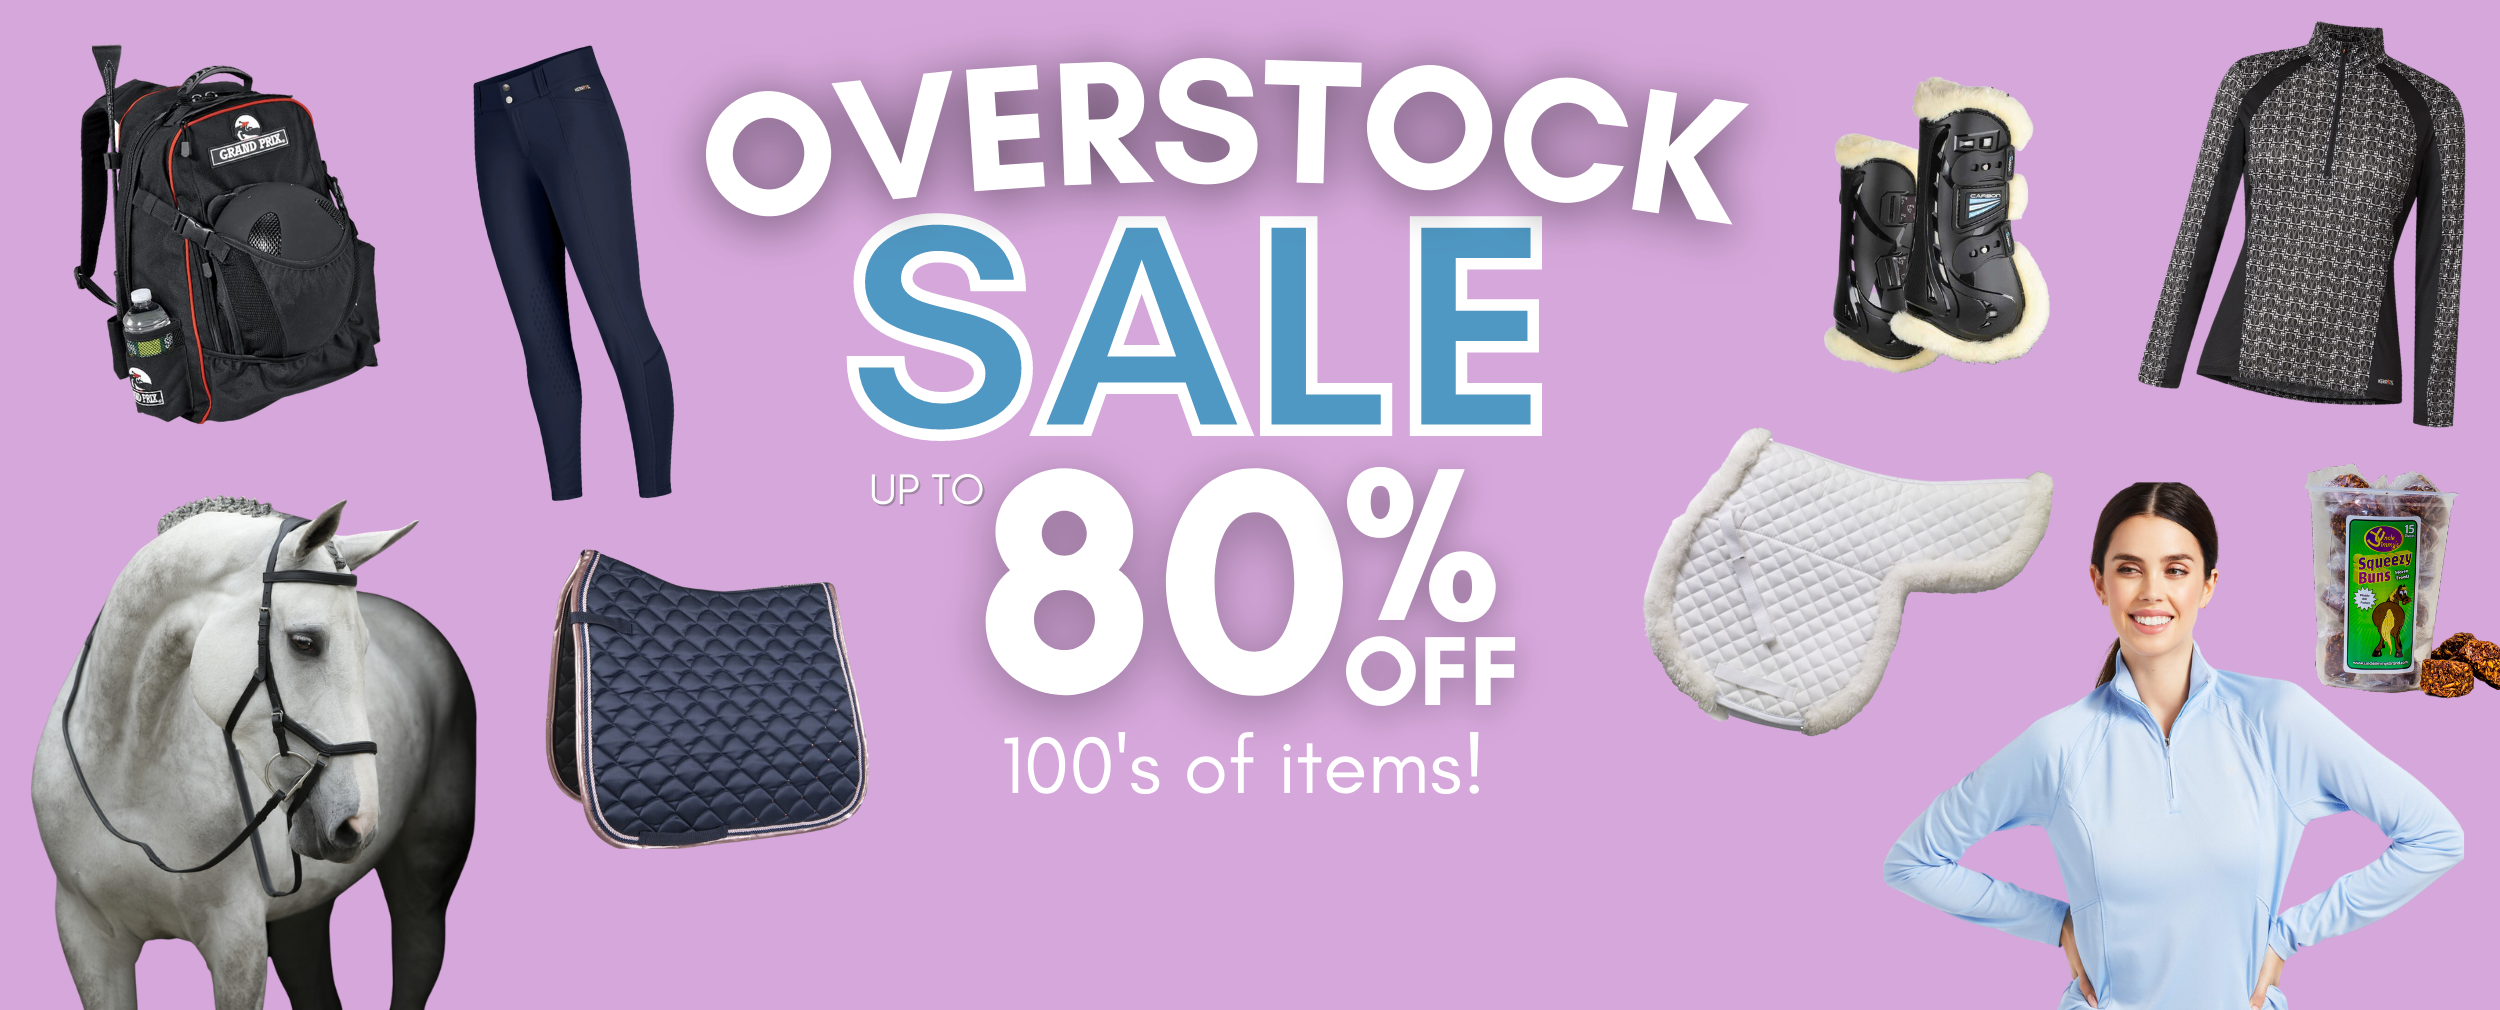 overstock-sale-banner.png